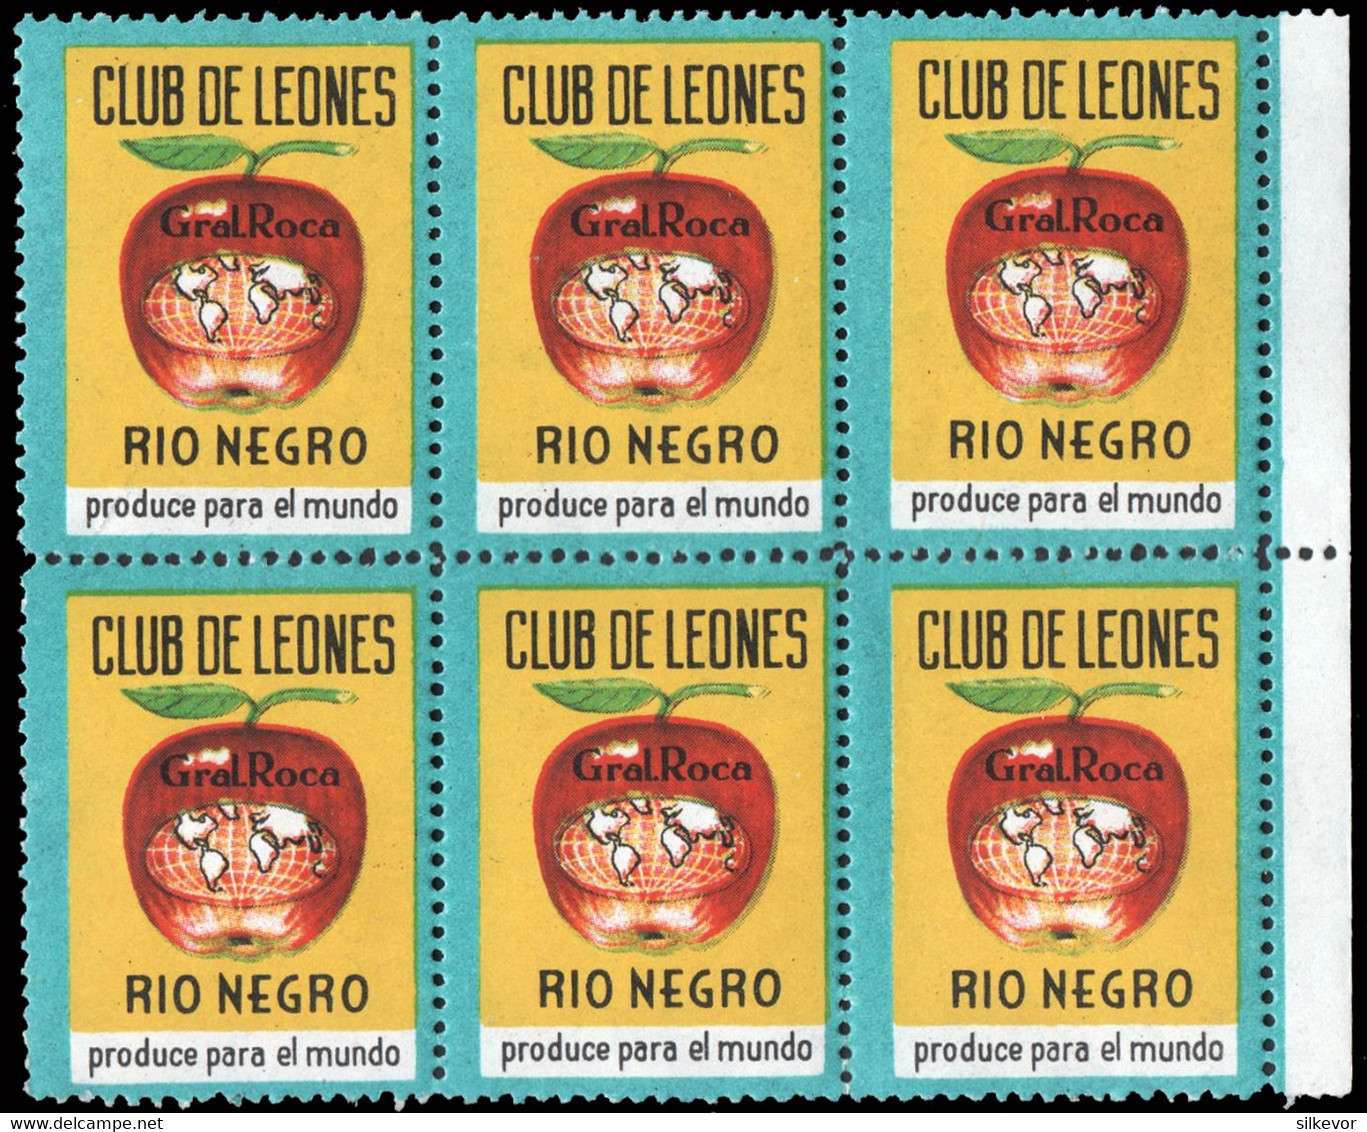 LIONS CLUB-STAMPS-ARGENTINA-CINDERELLA ISSUED IN  1964 BY GENERAL ROCA LIONS CLUB( RIO NEGRO PROVINCE) - Franking Labels